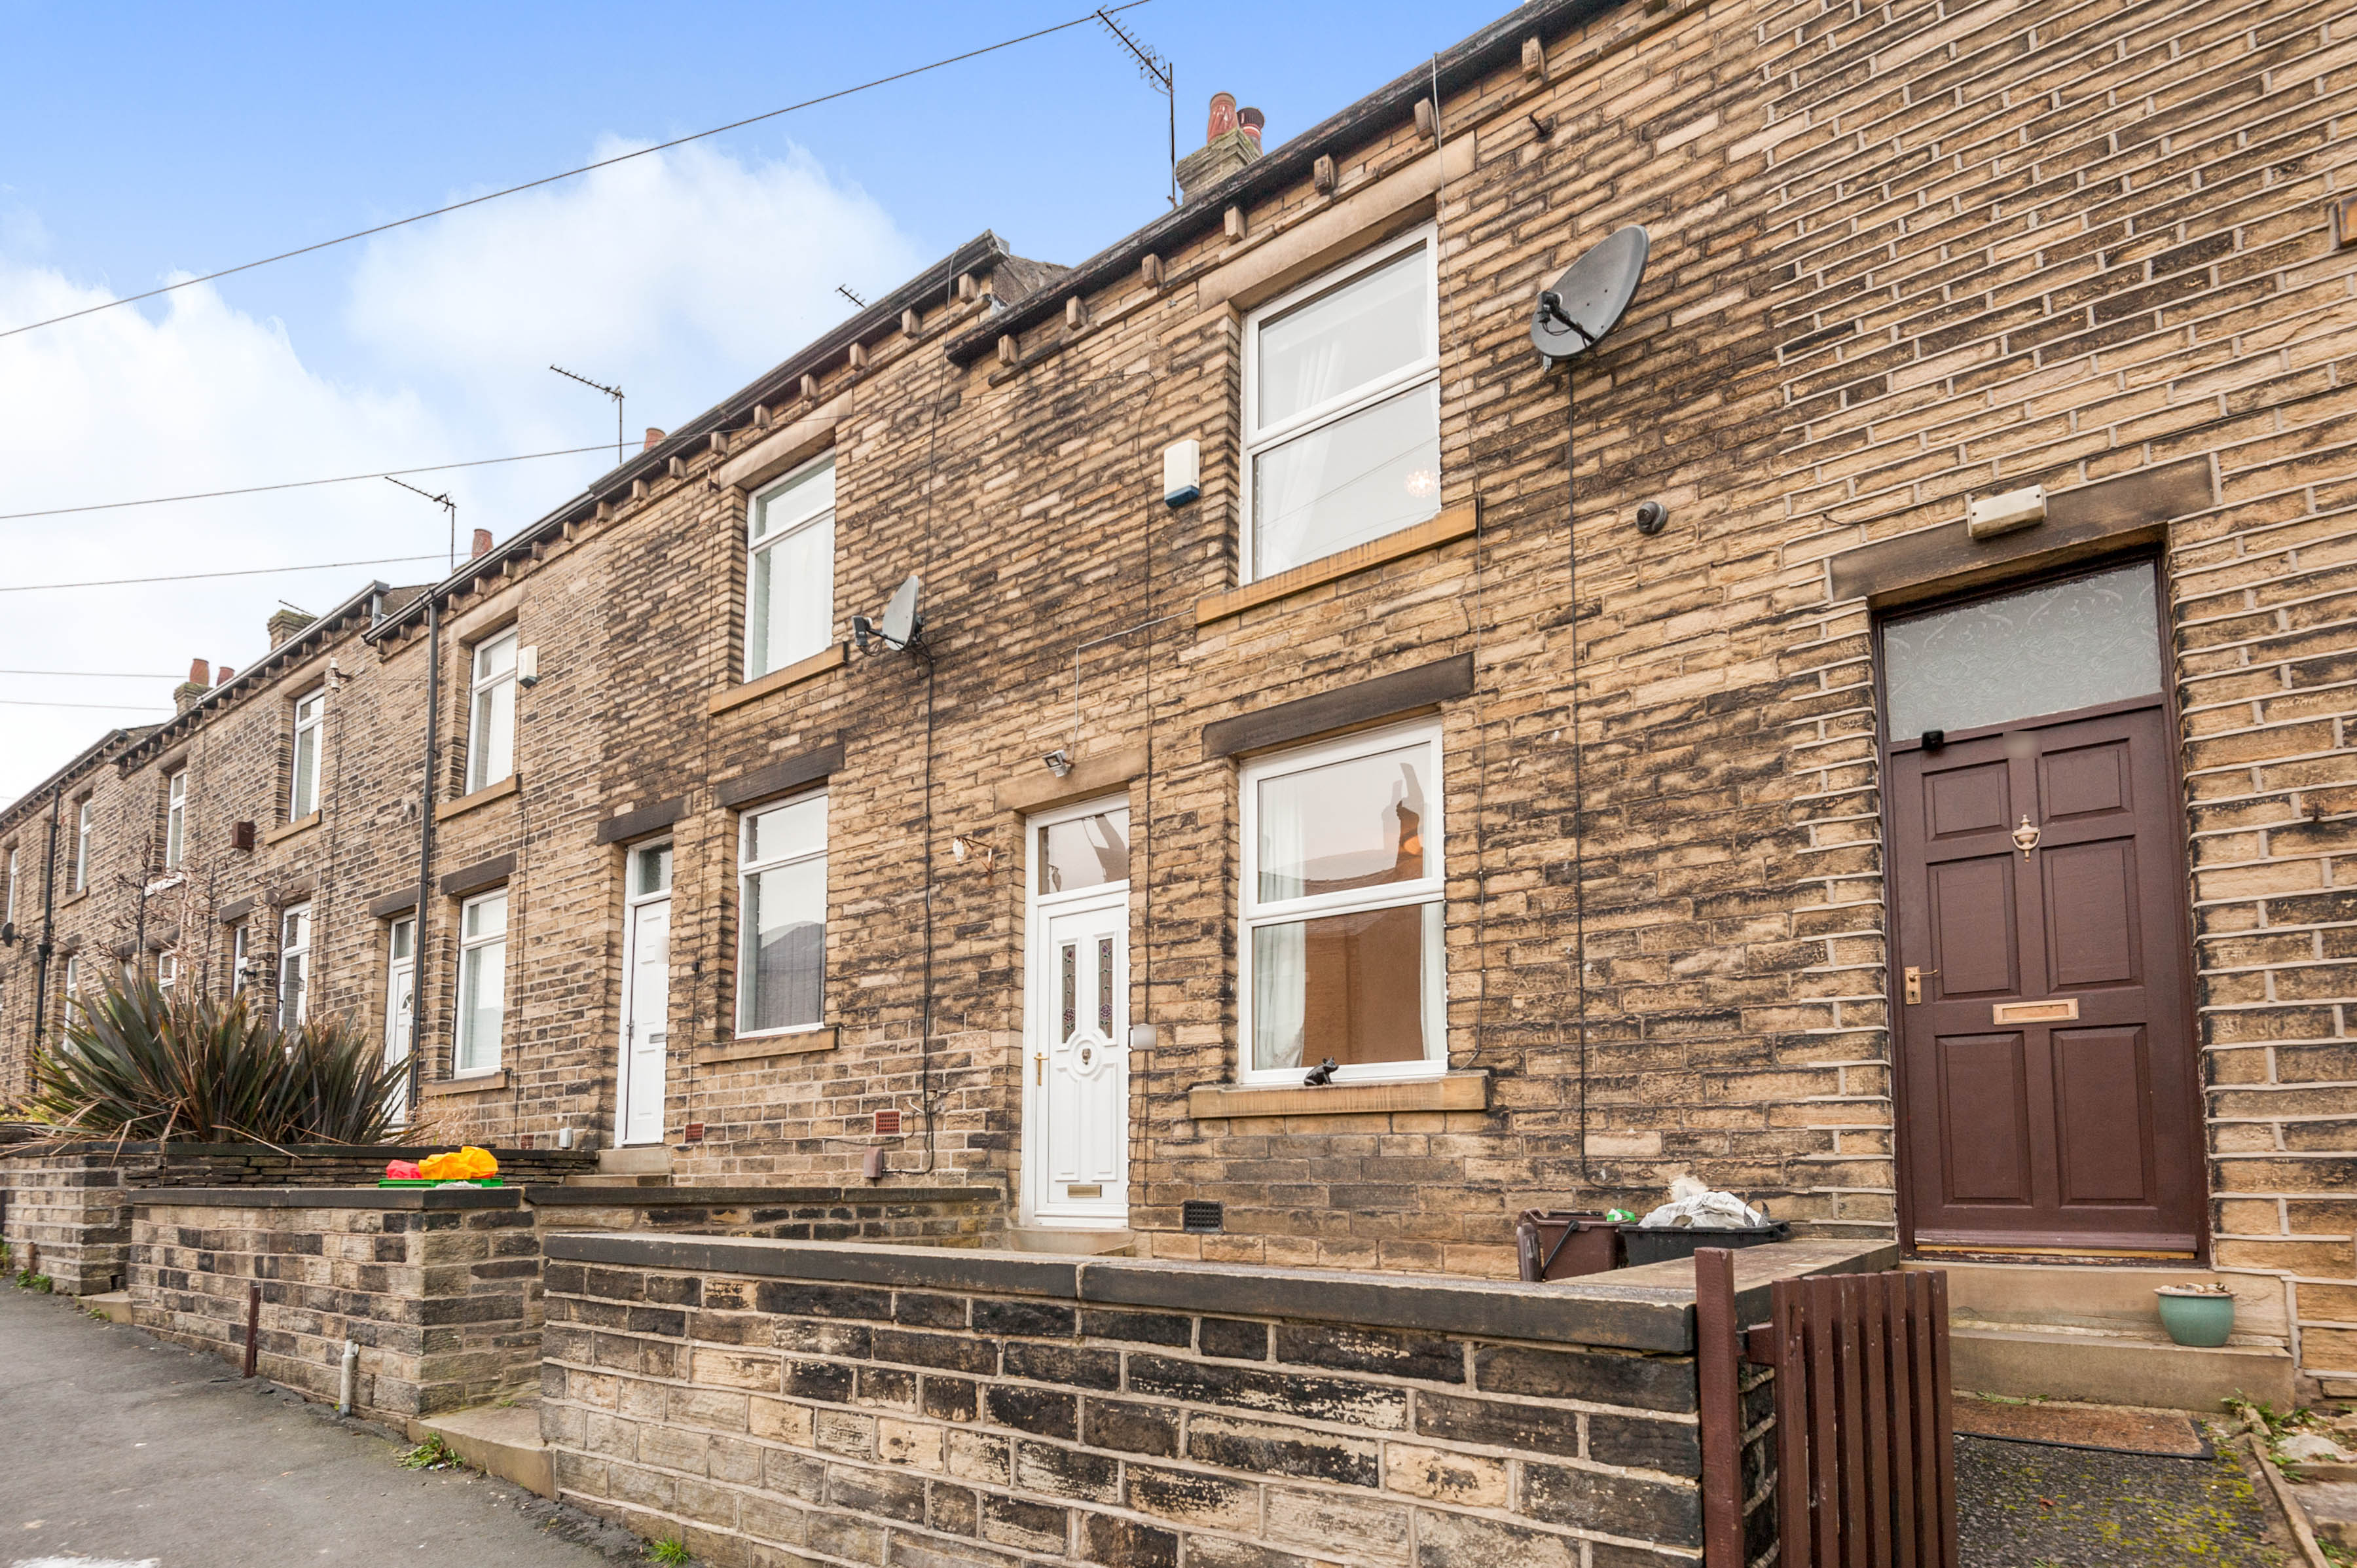 2 Bedroom Terraced House For Sale In Garlick Street Brighouse Hd6 3pw 7472